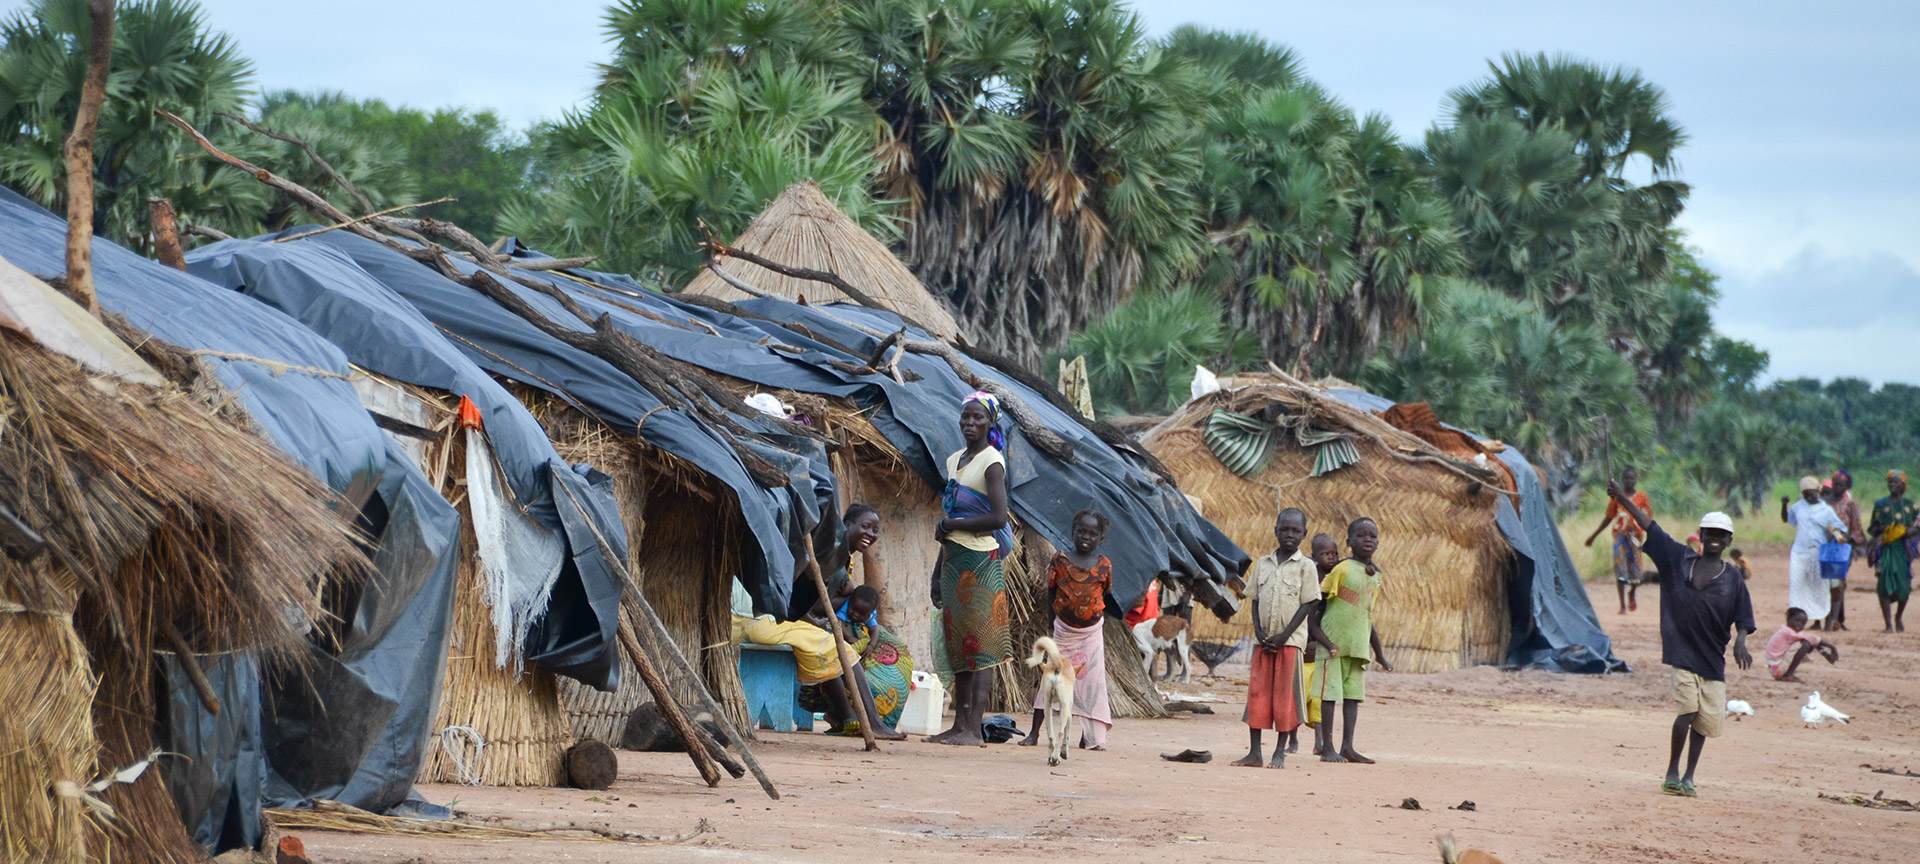 Women and children dressed in colorful clothing gather outside a line of small cabins made of straw. 